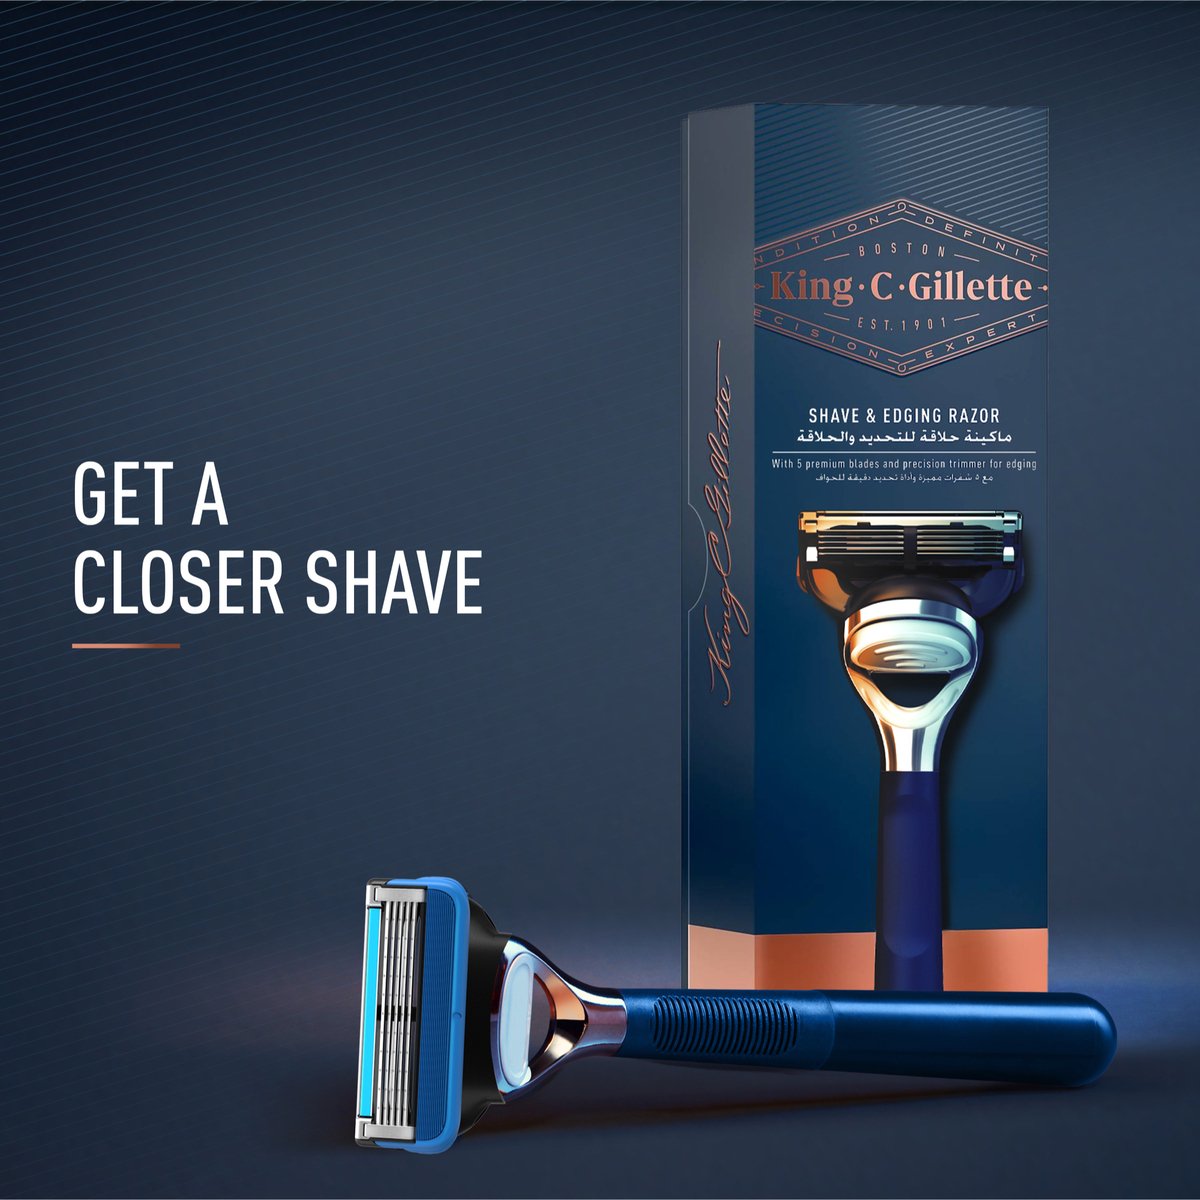 King C. Gillette Men's 5 Blade Shave and Edging Razor with Built In Single Blade Precision Trimmer and Premium Handle 1Up